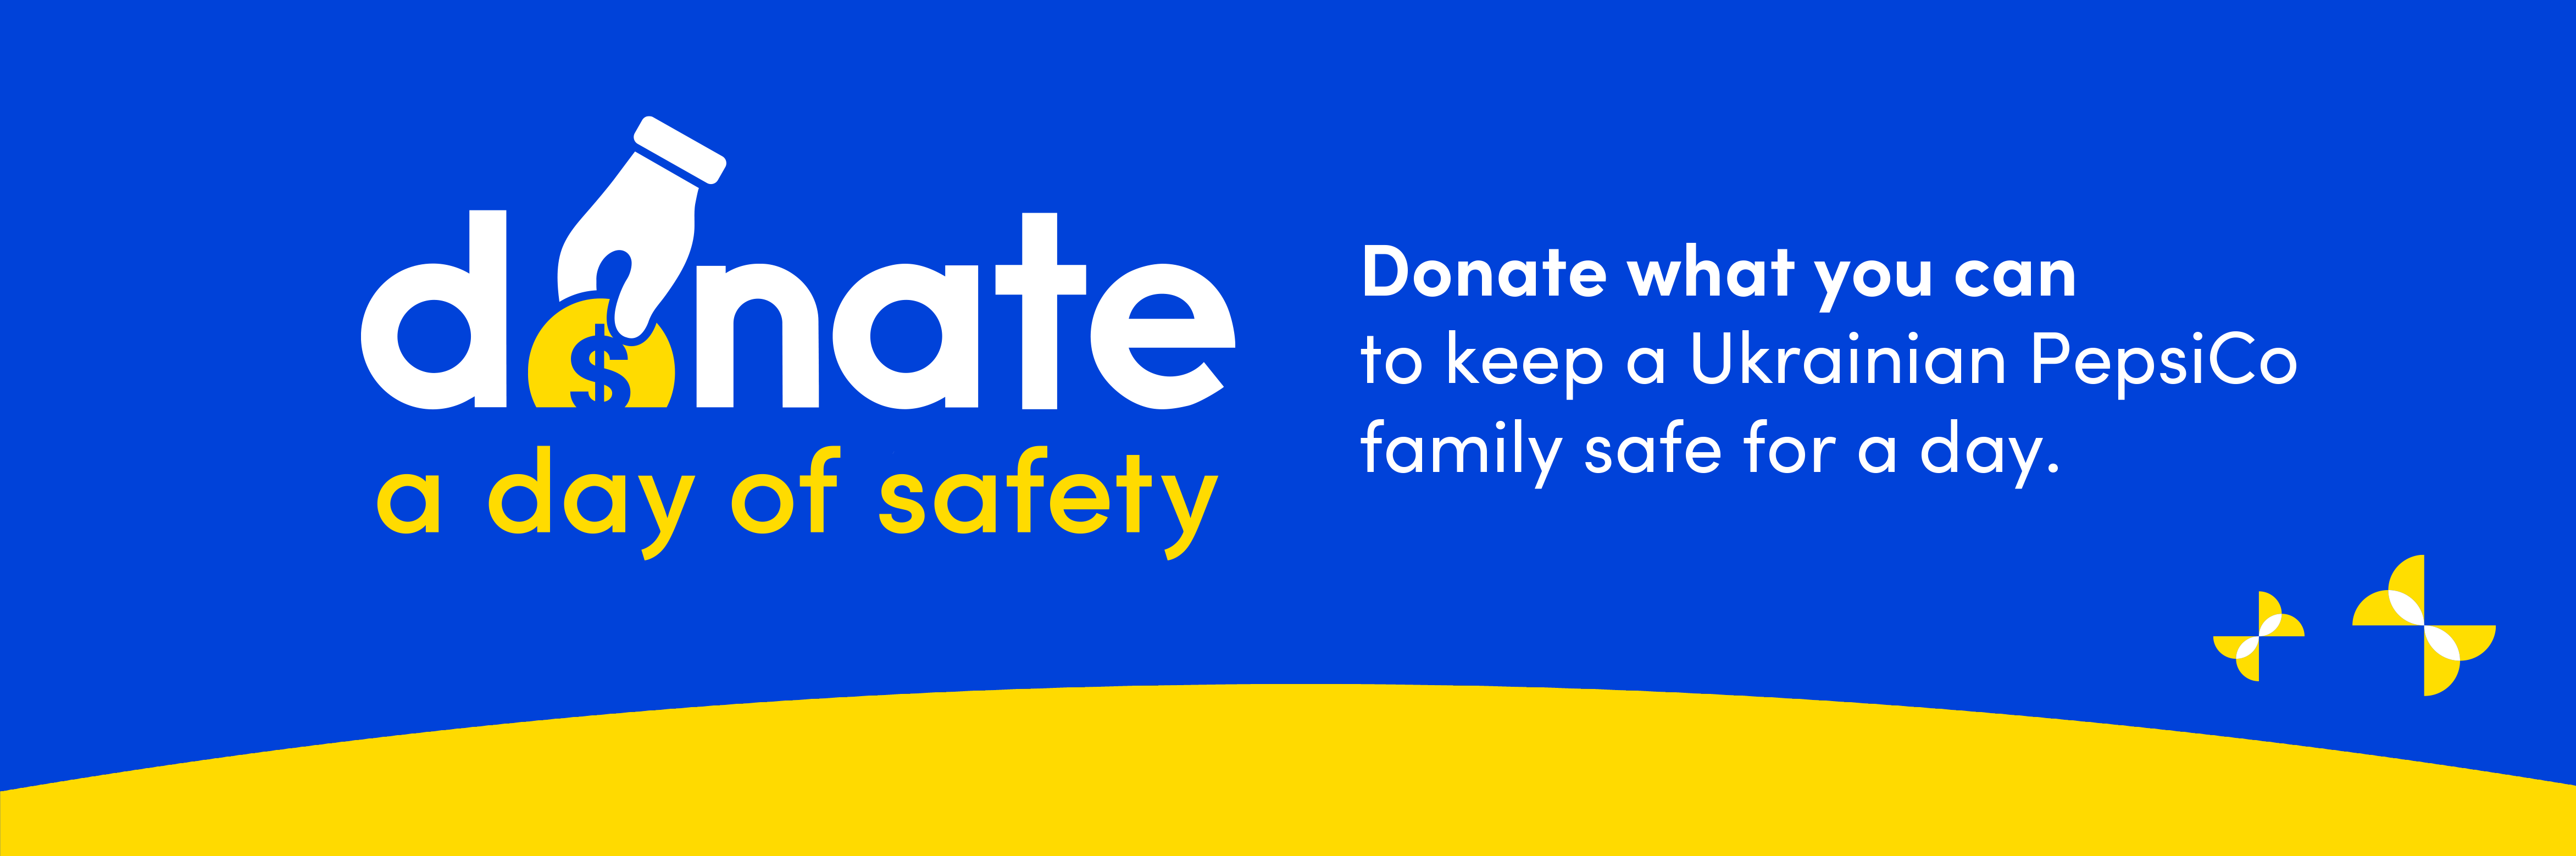 Donate a day web banner: Donate what you can to keep a Ukrainian PepsiCo family safe for a day.